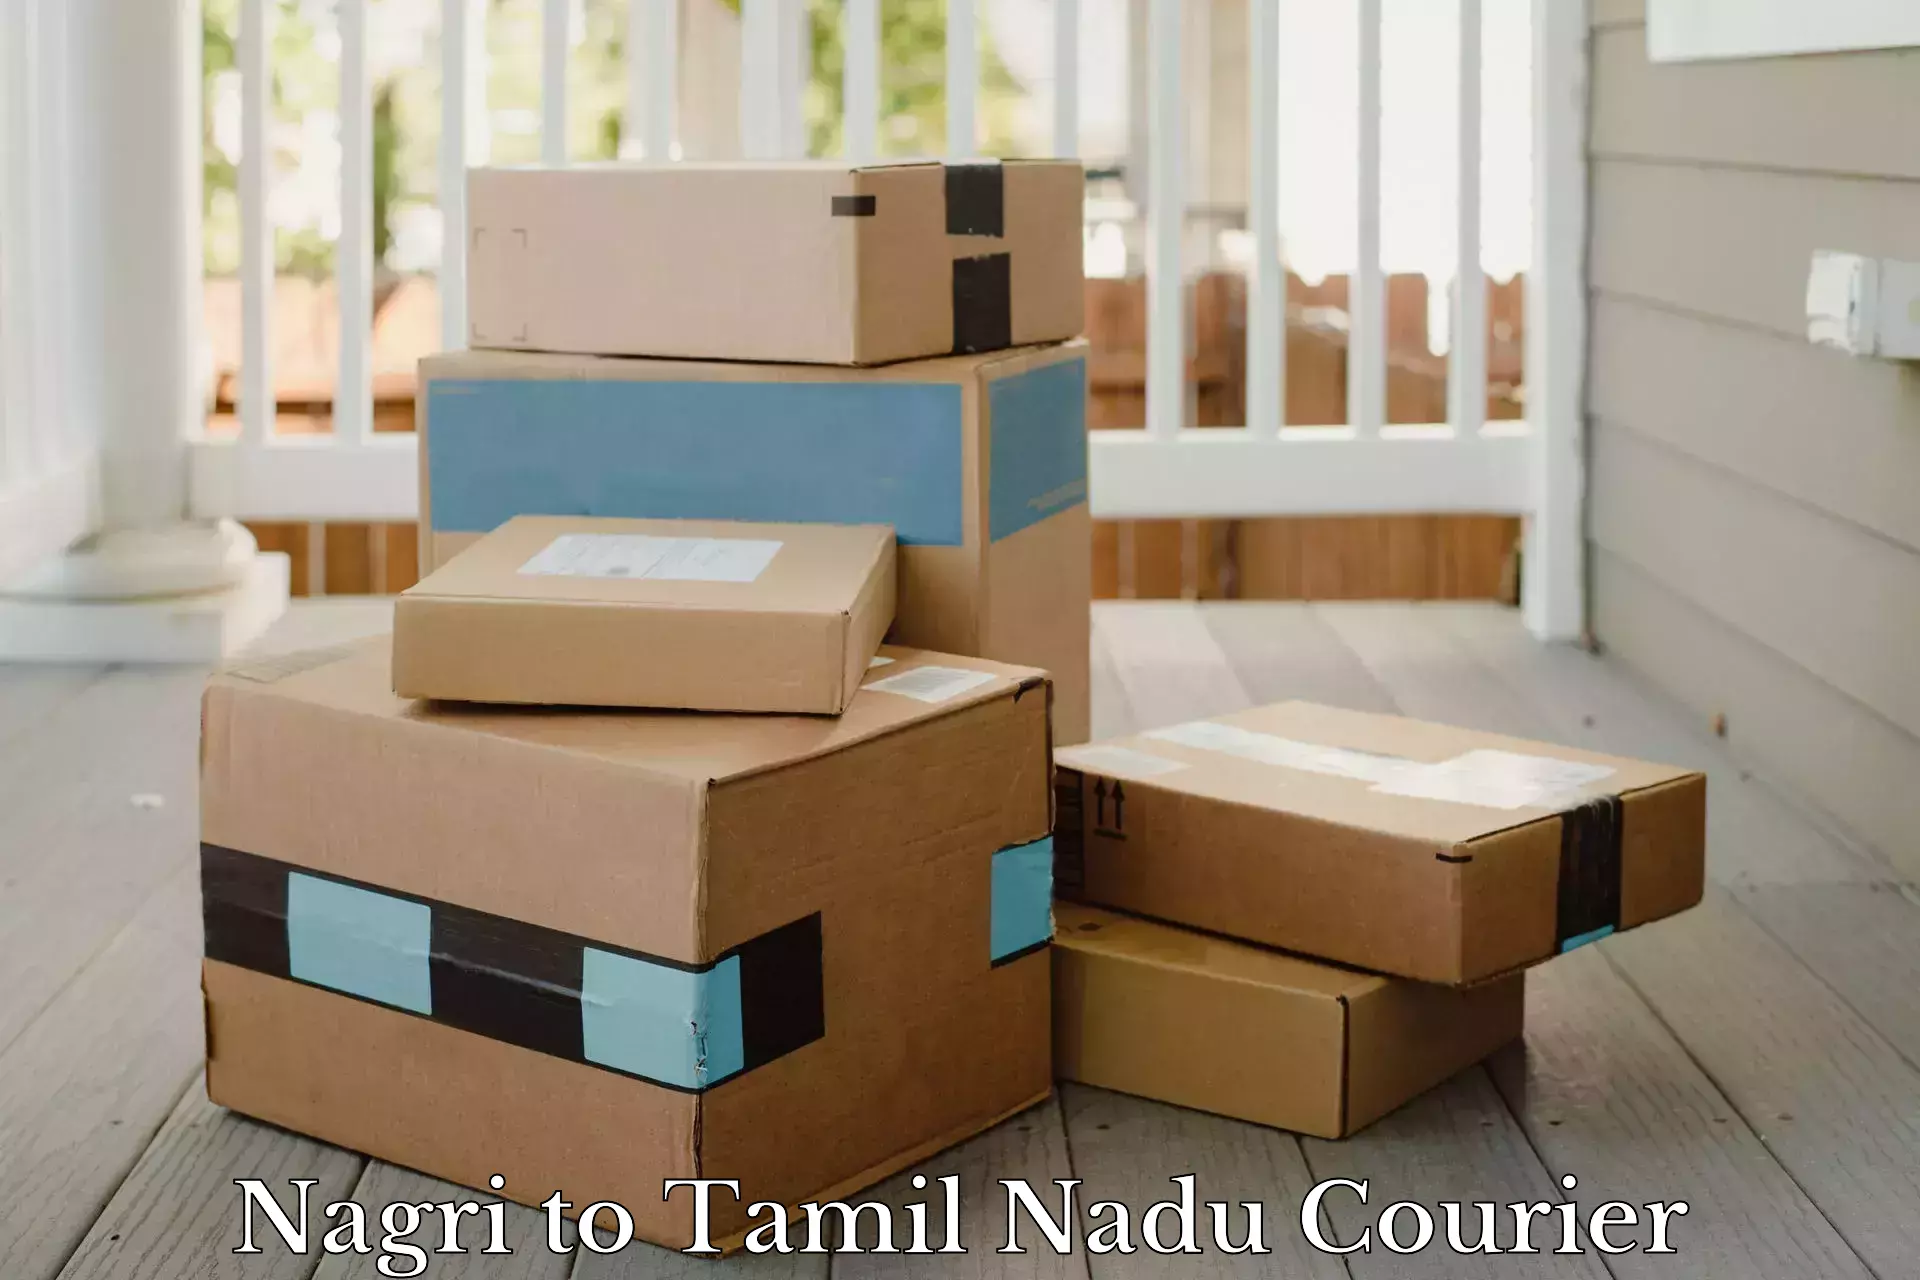 Courier service booking Nagri to Ennore Port Chennai